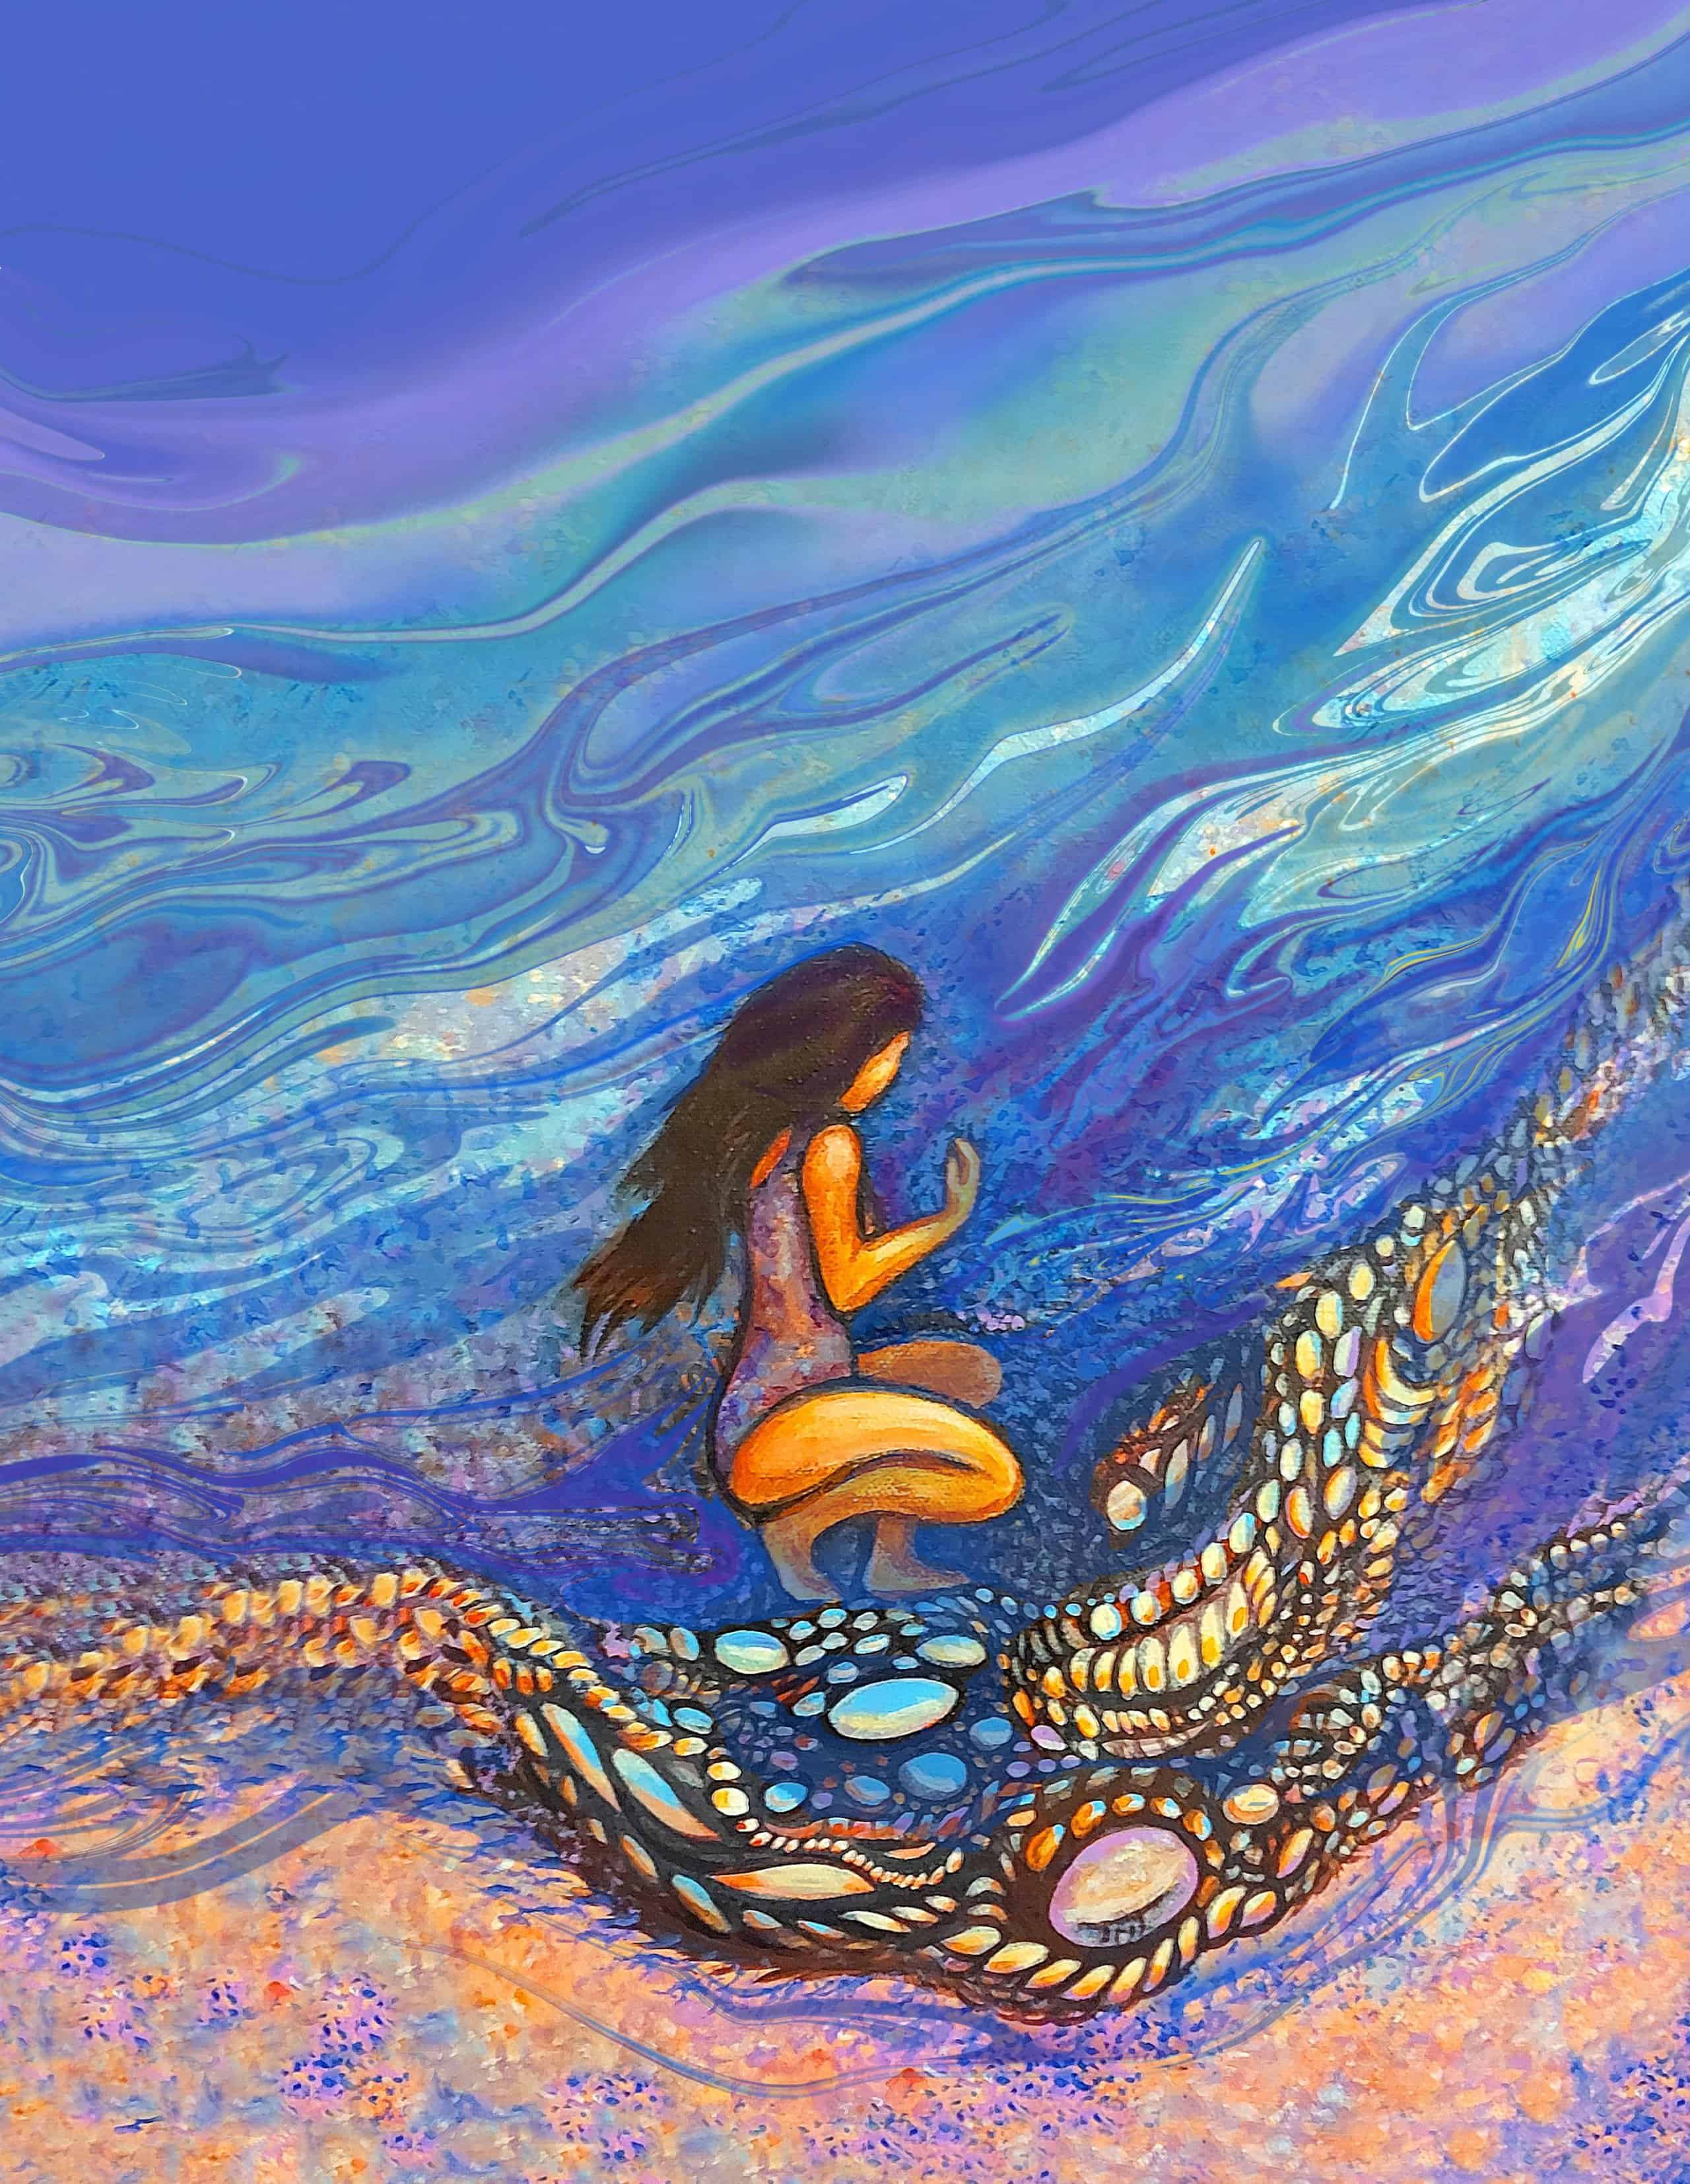 A painting of a woman in water.